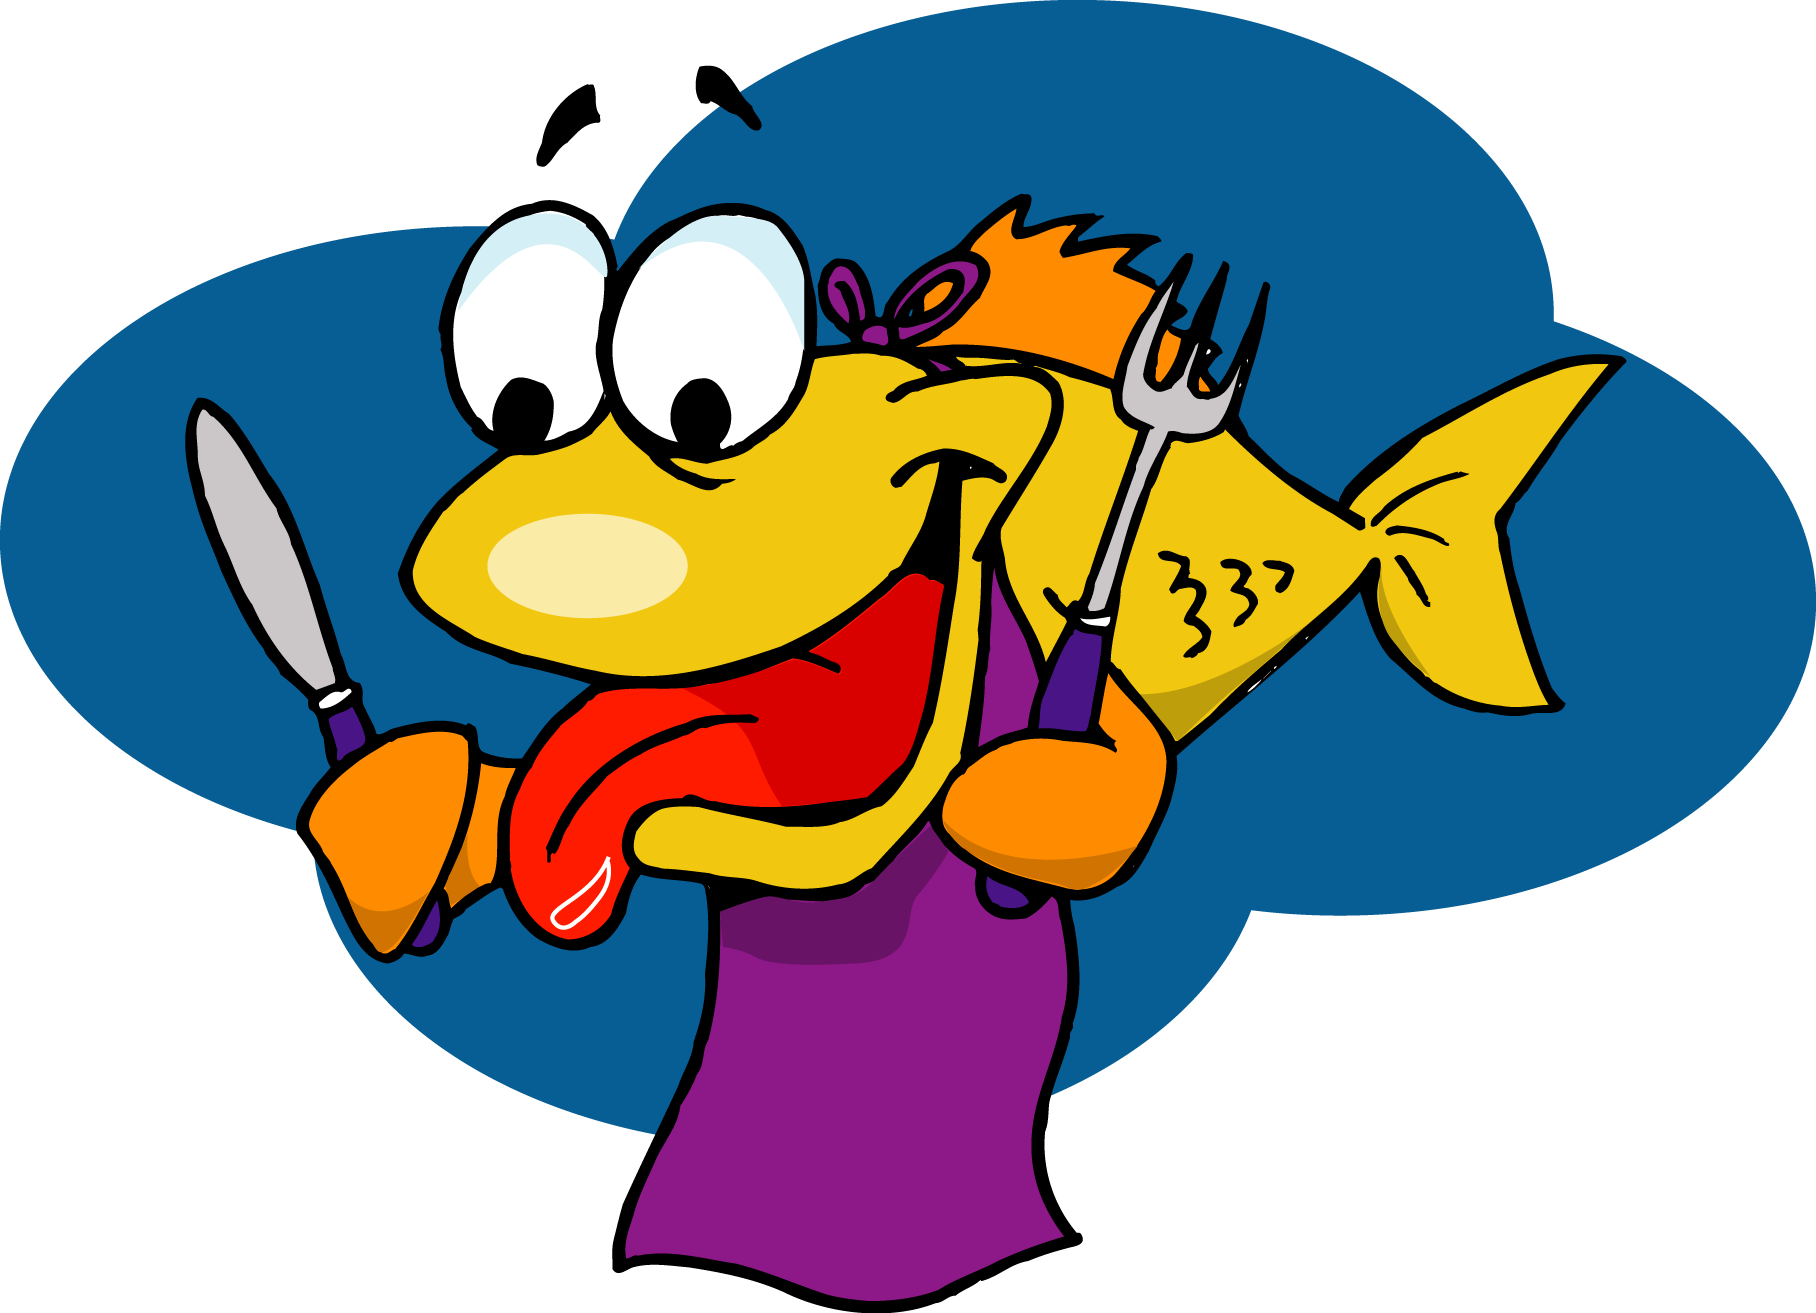 St lucy fry saint. Fries clipart frying fish